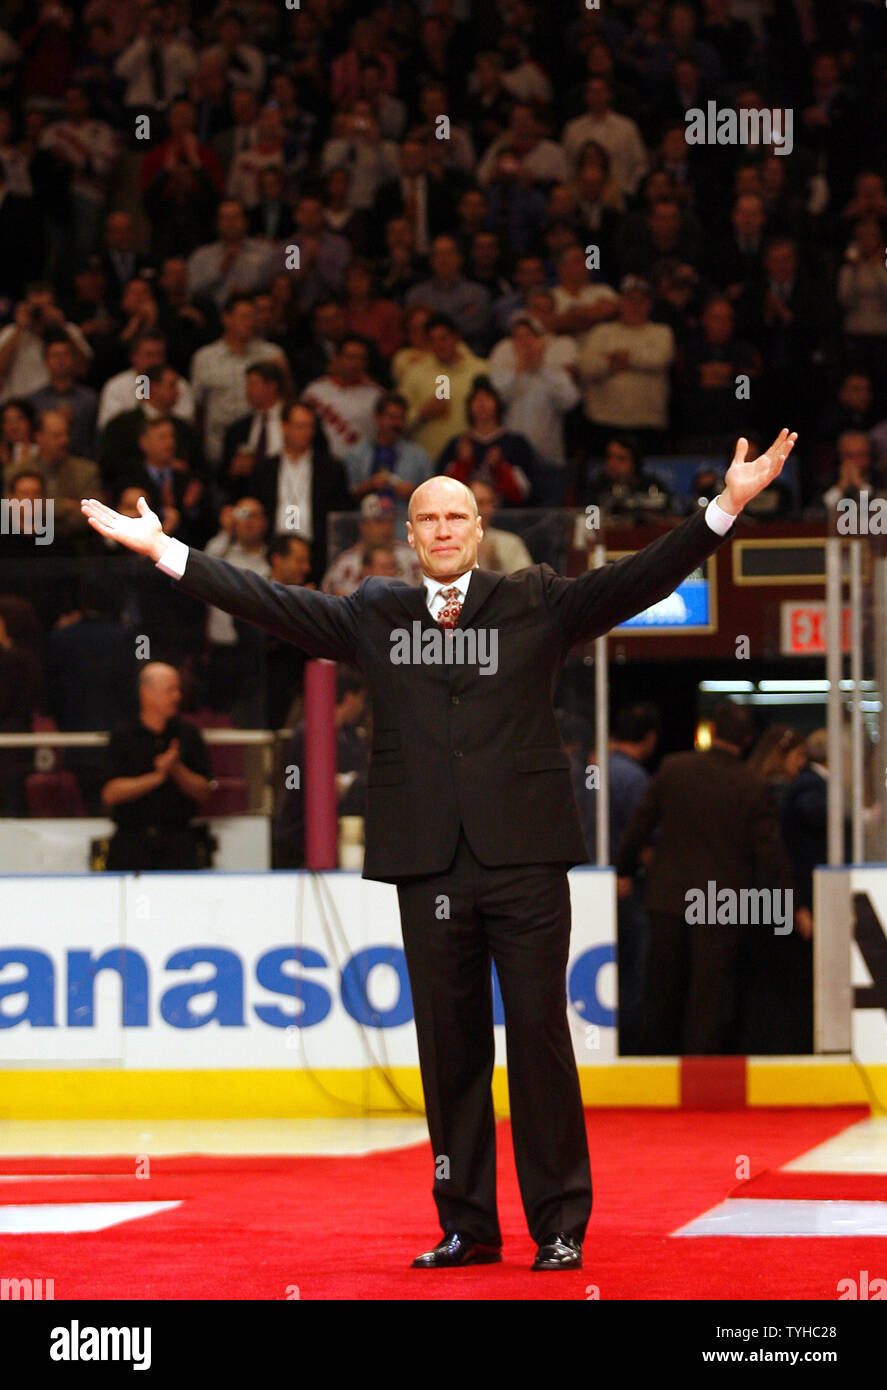 New York Rangers longtime captain Mark Messier has his No. 11 raised to the MSG  rafters at Madison Square Garden in New York City on January 12, 2006. Mark  Messier becomes the